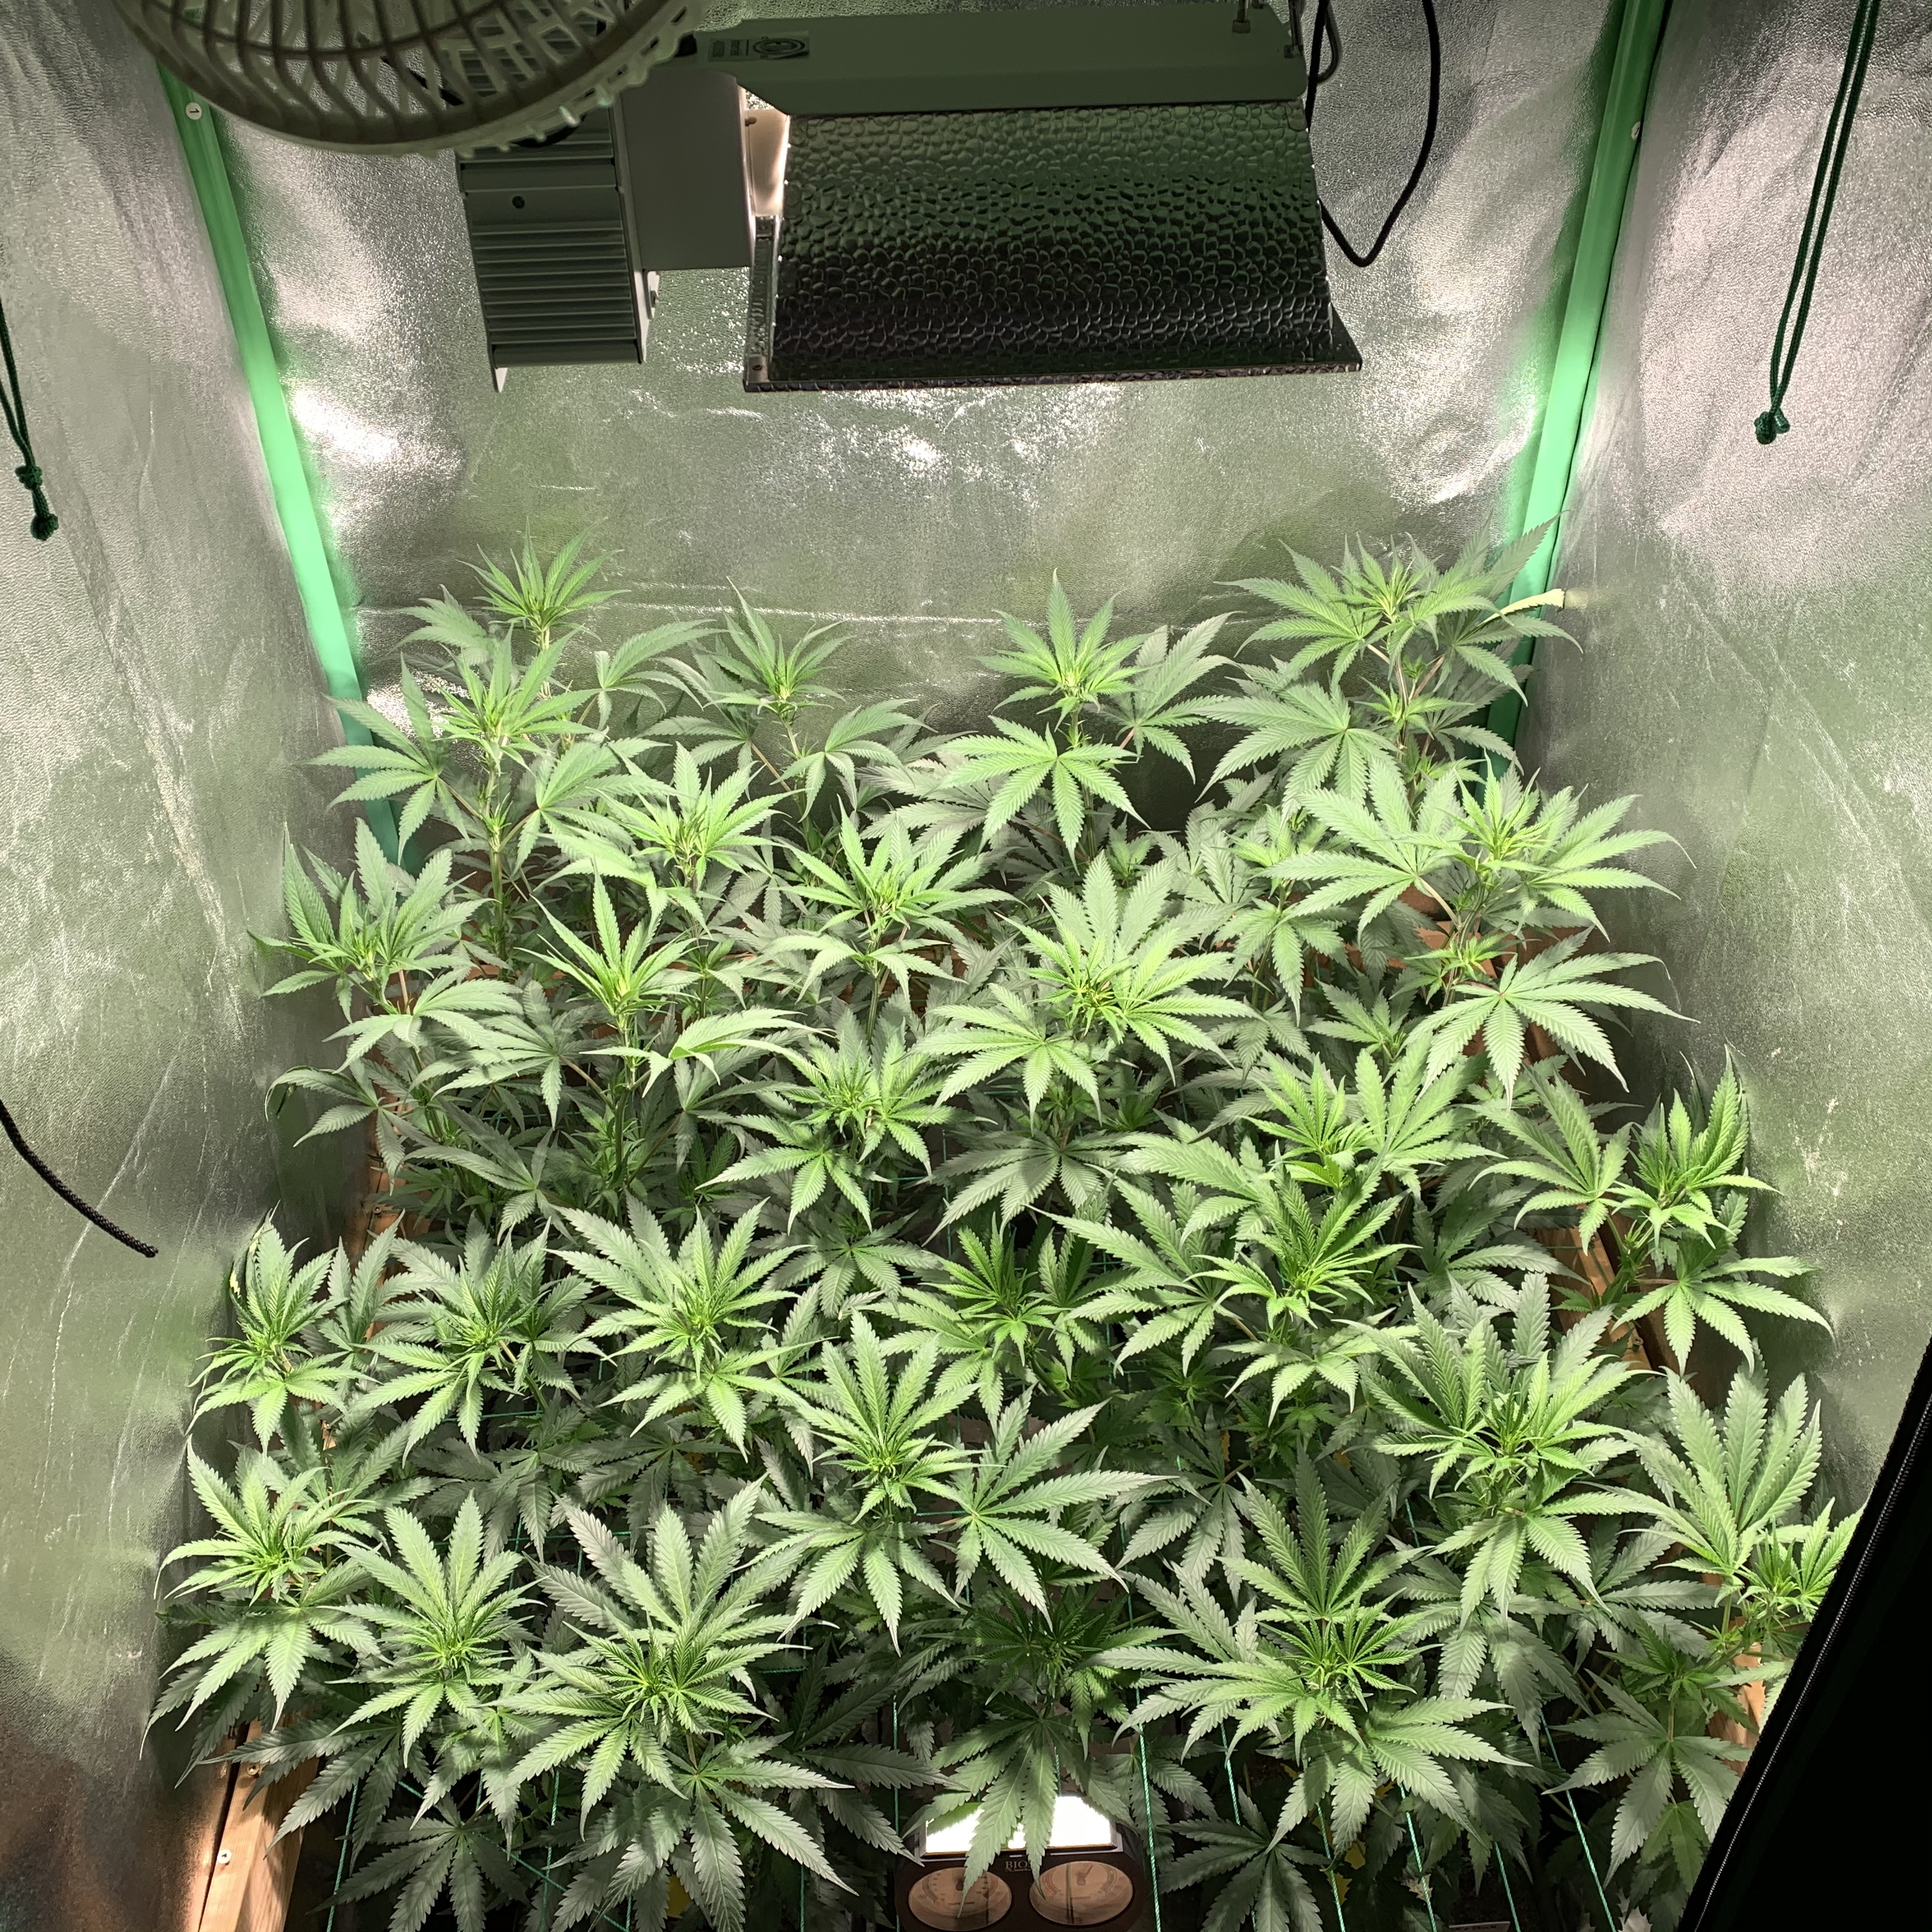 End of wk 1 flower